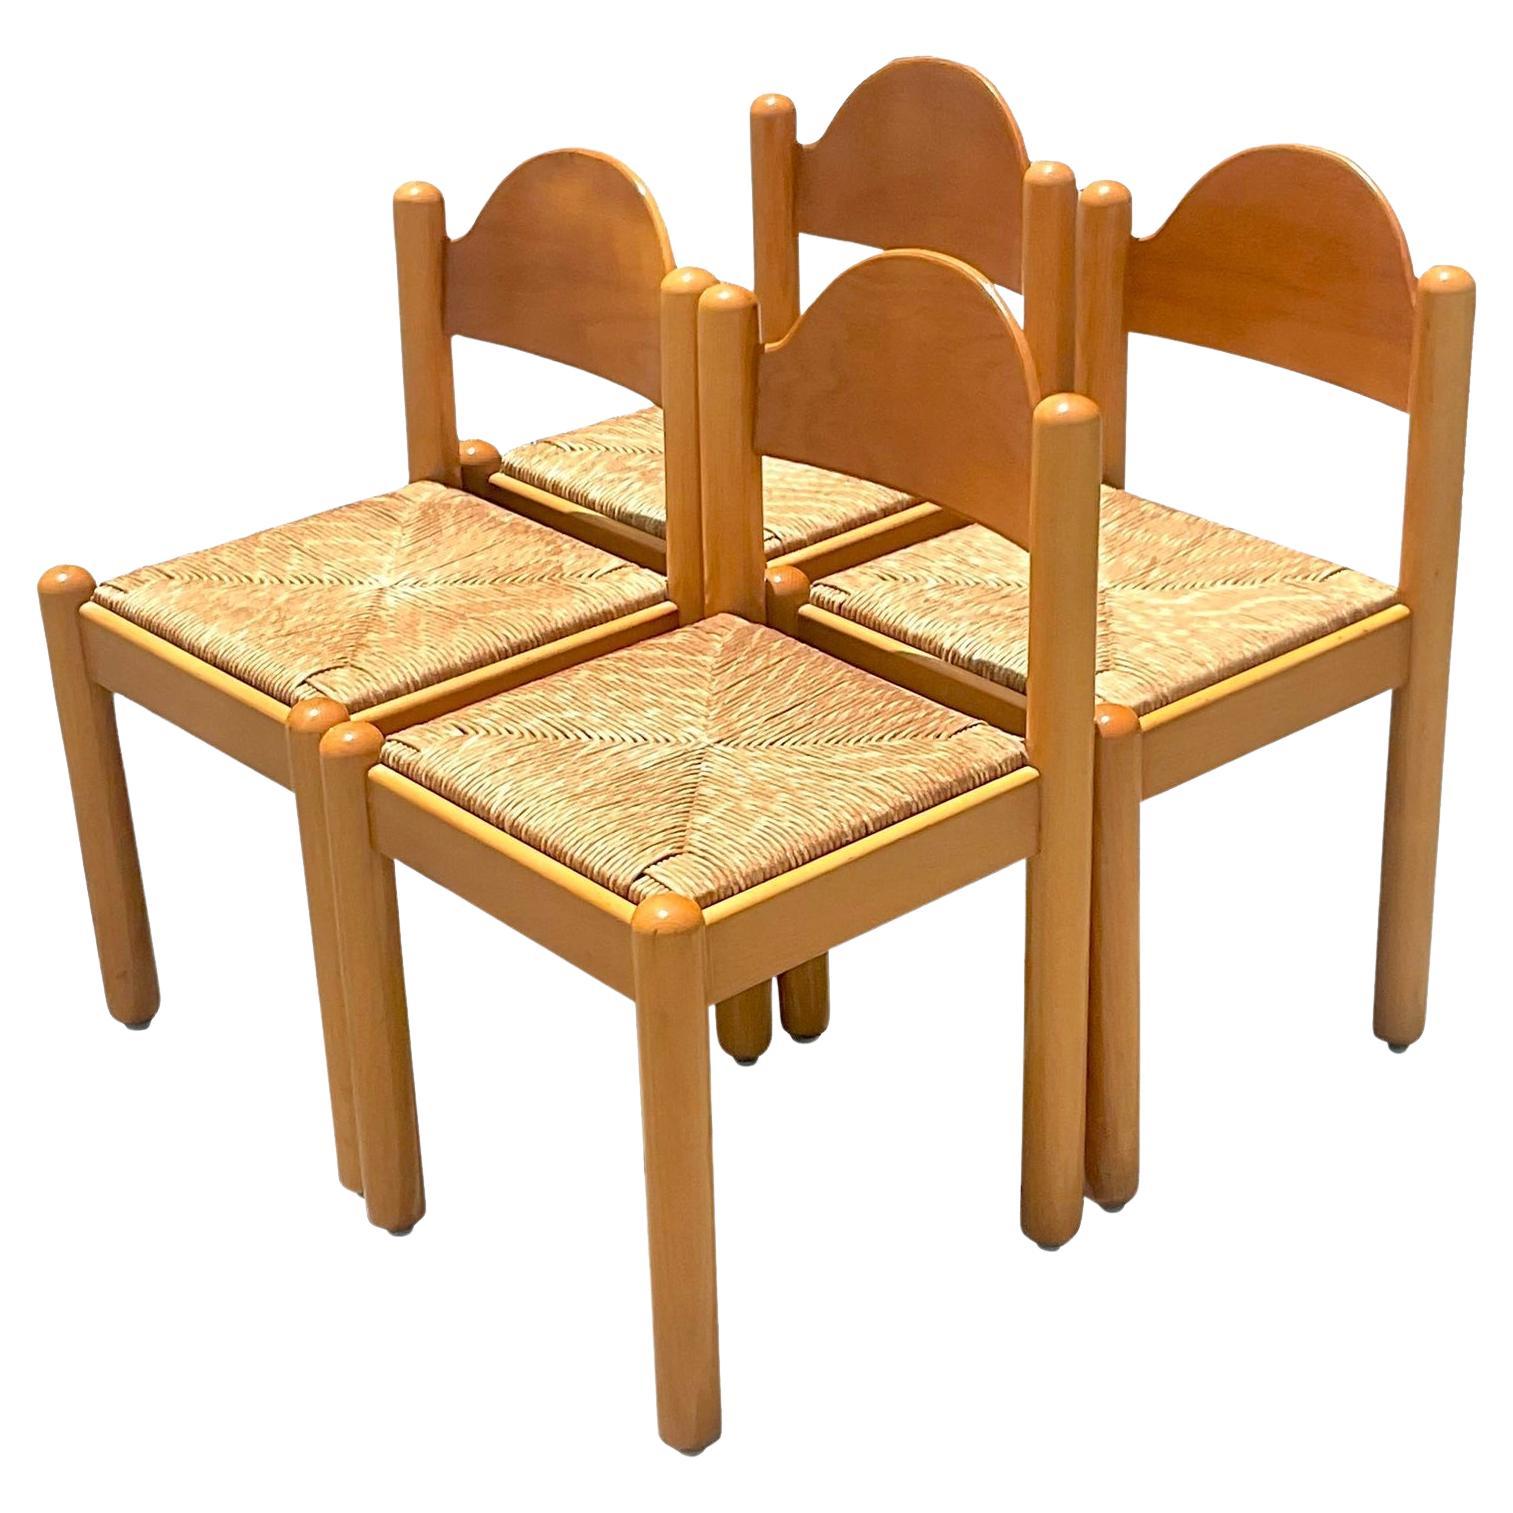 Vintage Boho Italian Padova Chairs After Hank Lowenstein - Set of 4 For Sale